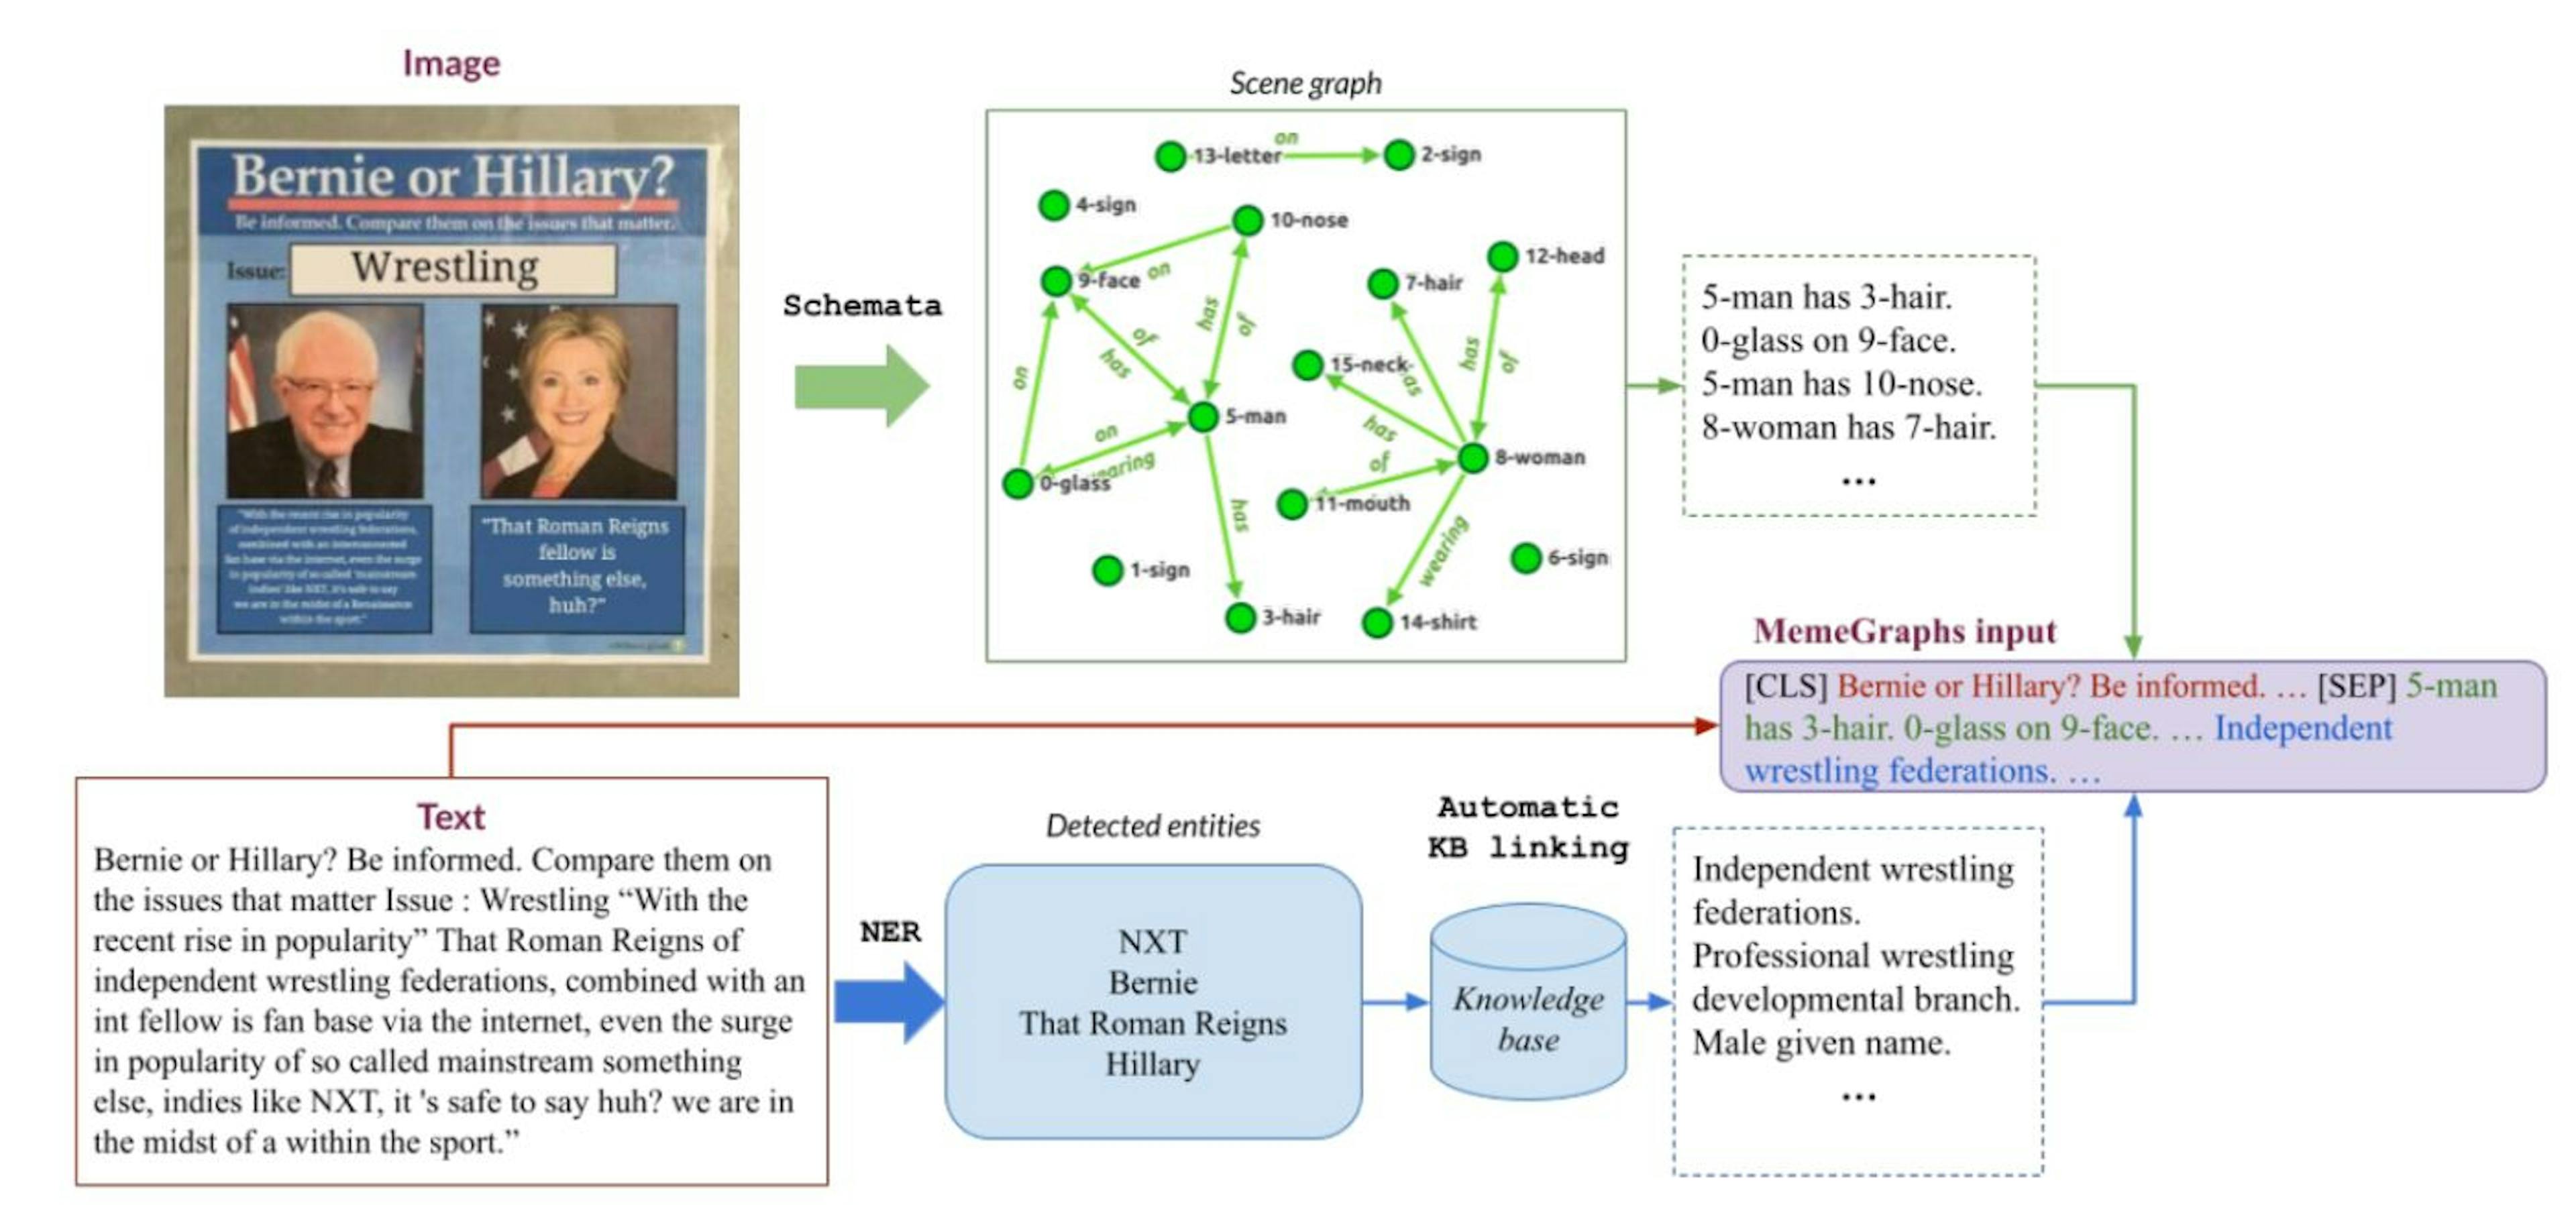 Figure 1: The steps performed by the MemeGraphs method. The automatic augmentation consists of scene graphs generated automatically by a pre-trained model (Schemata [26]) and entities detected in the text by a pre-trained Named Entity Recognition (NER) model. Background knowledge for each entity is retrieved from a knowledge base (Wikidata). The final MemeGraphs input is created by concatenating these augmentations and adding them after the [SEP] token following the text of the meme in order to feed it to a Transformer for text classification.